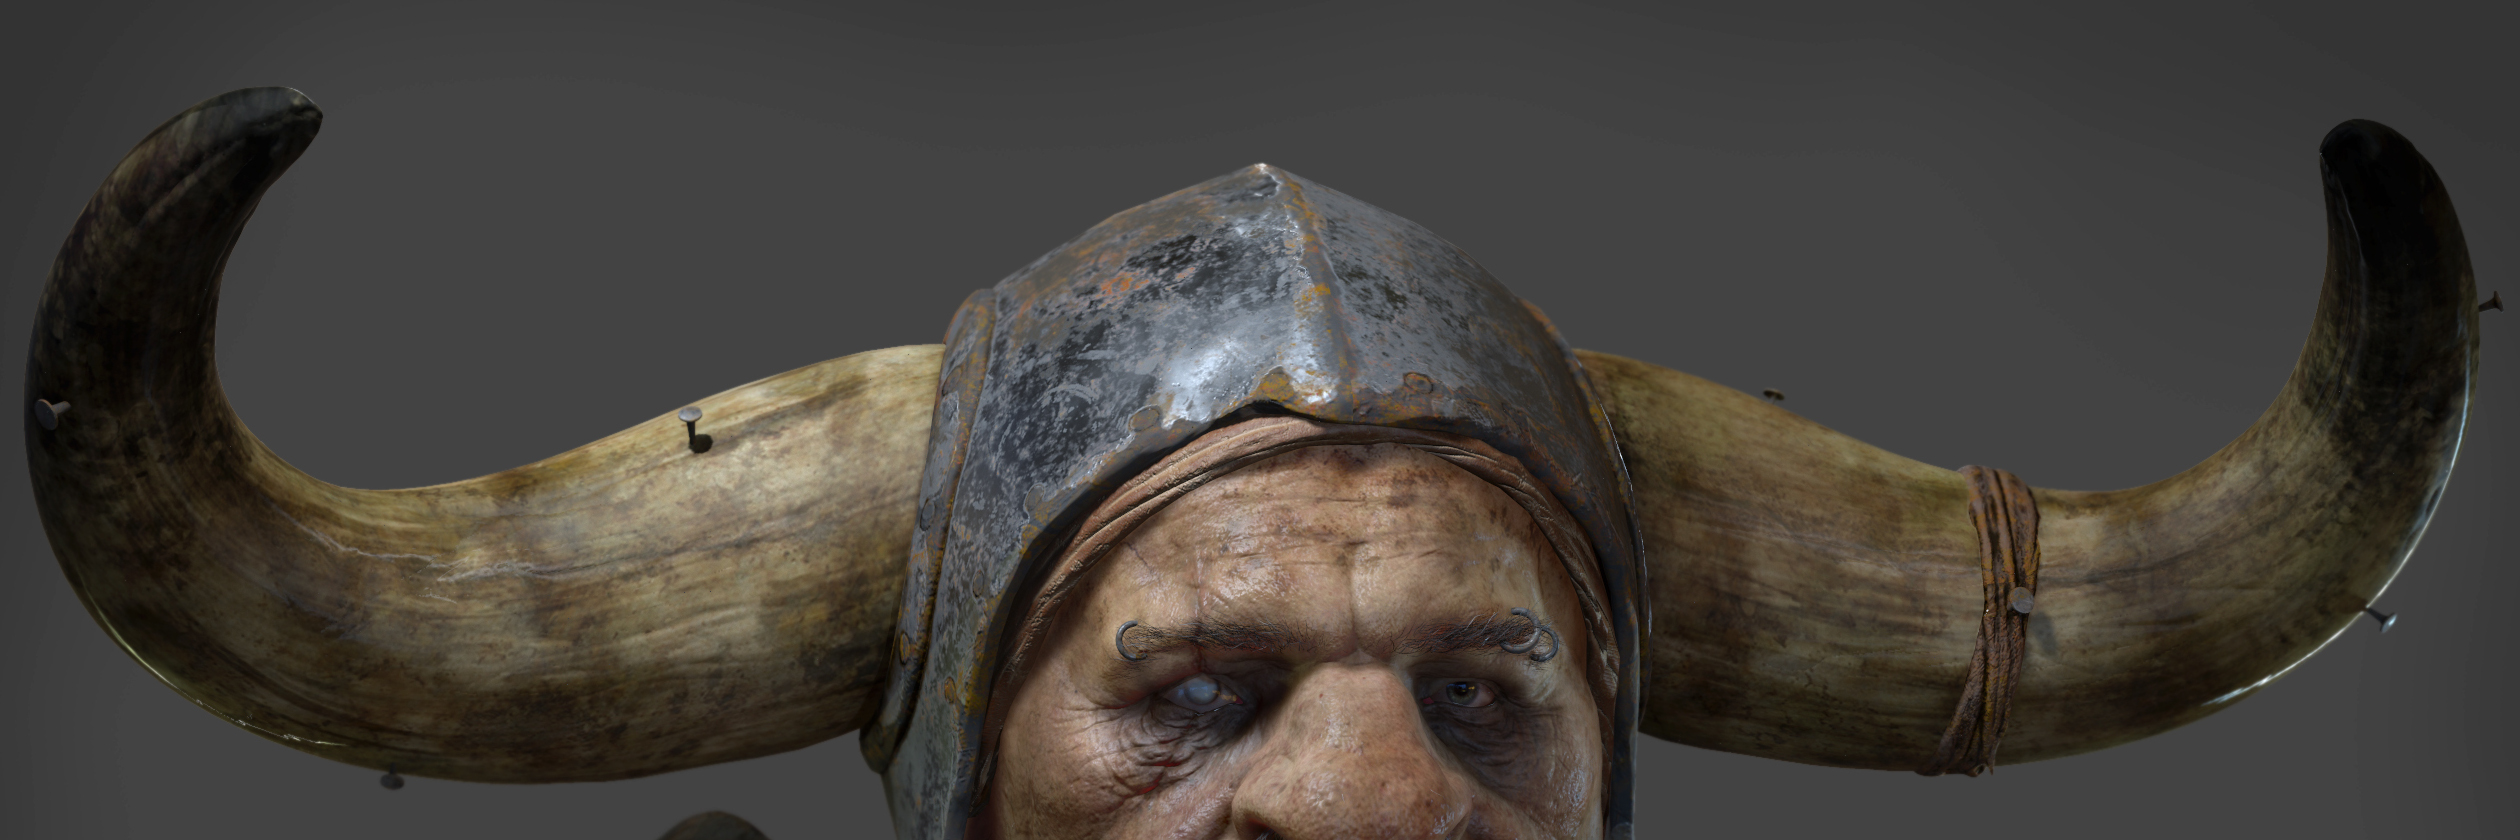 orc horns